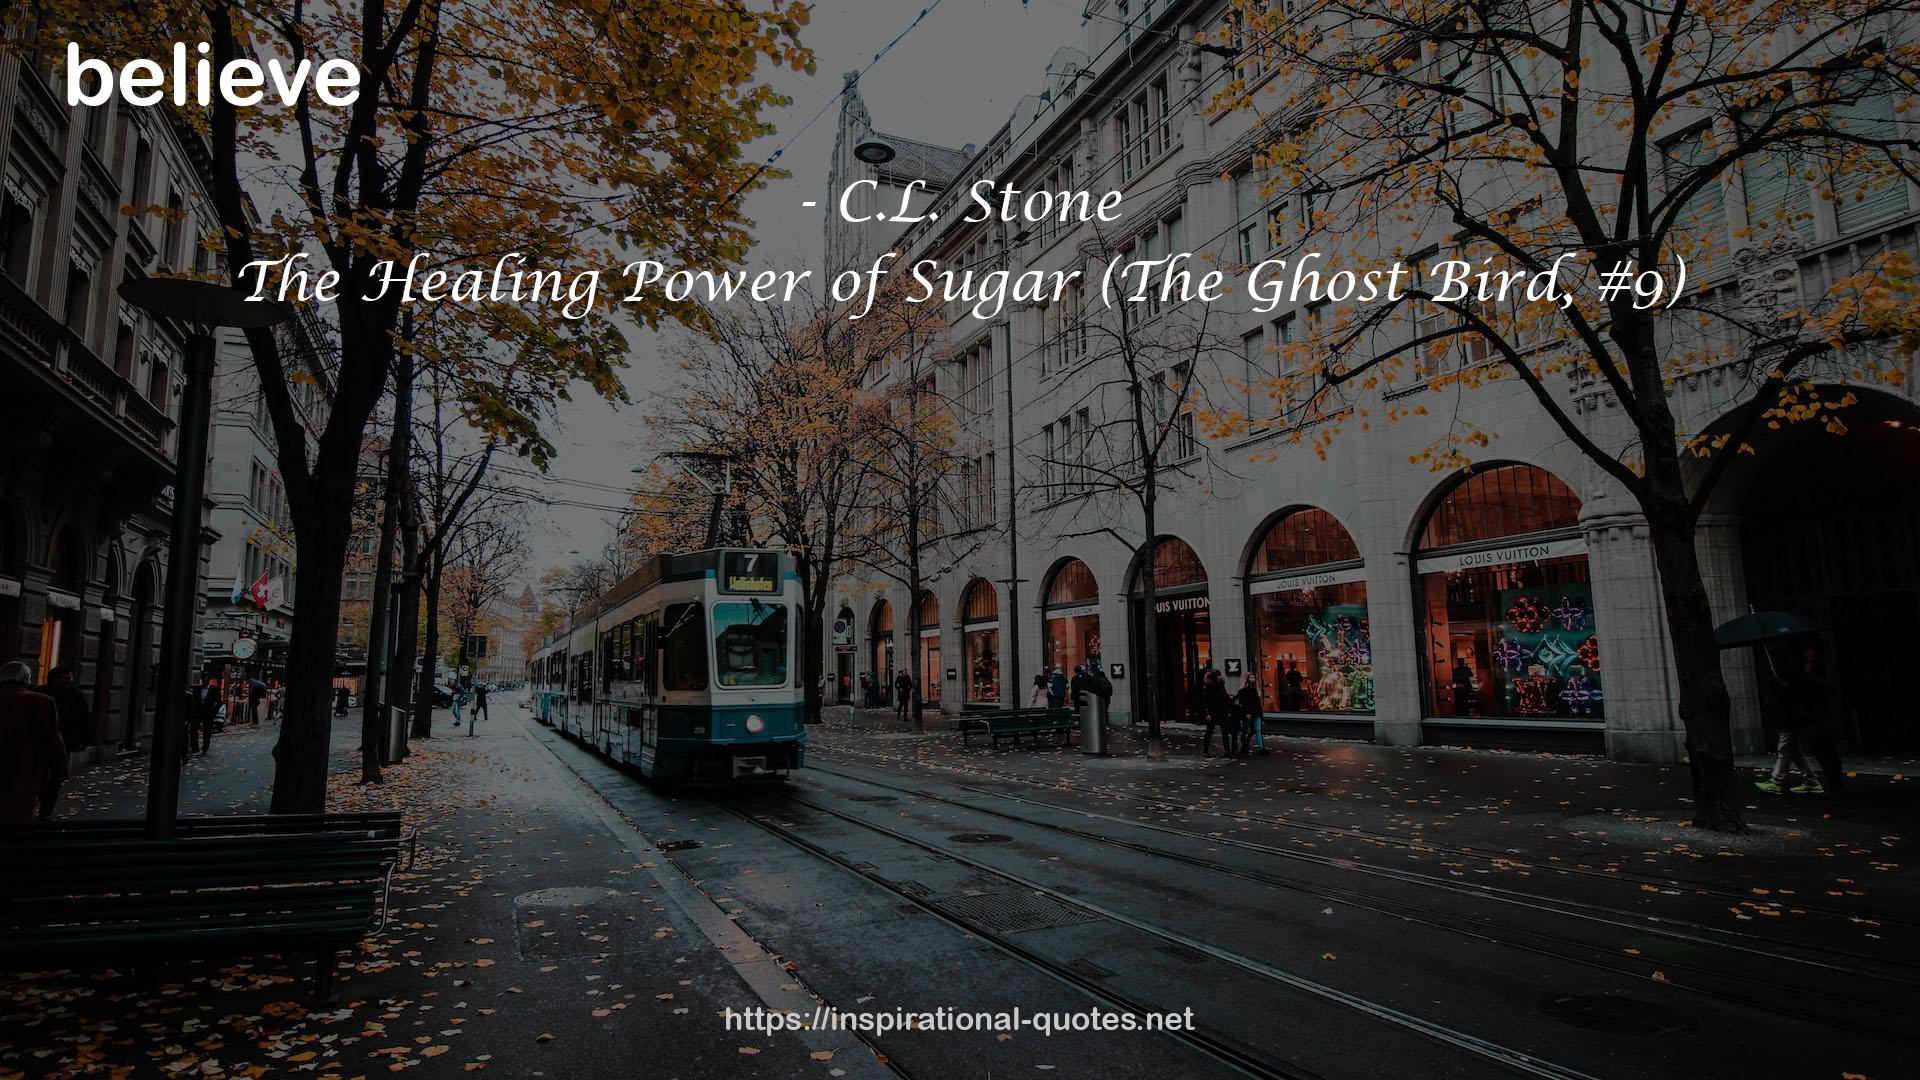 The Healing Power of Sugar (The Ghost Bird, #9) QUOTES